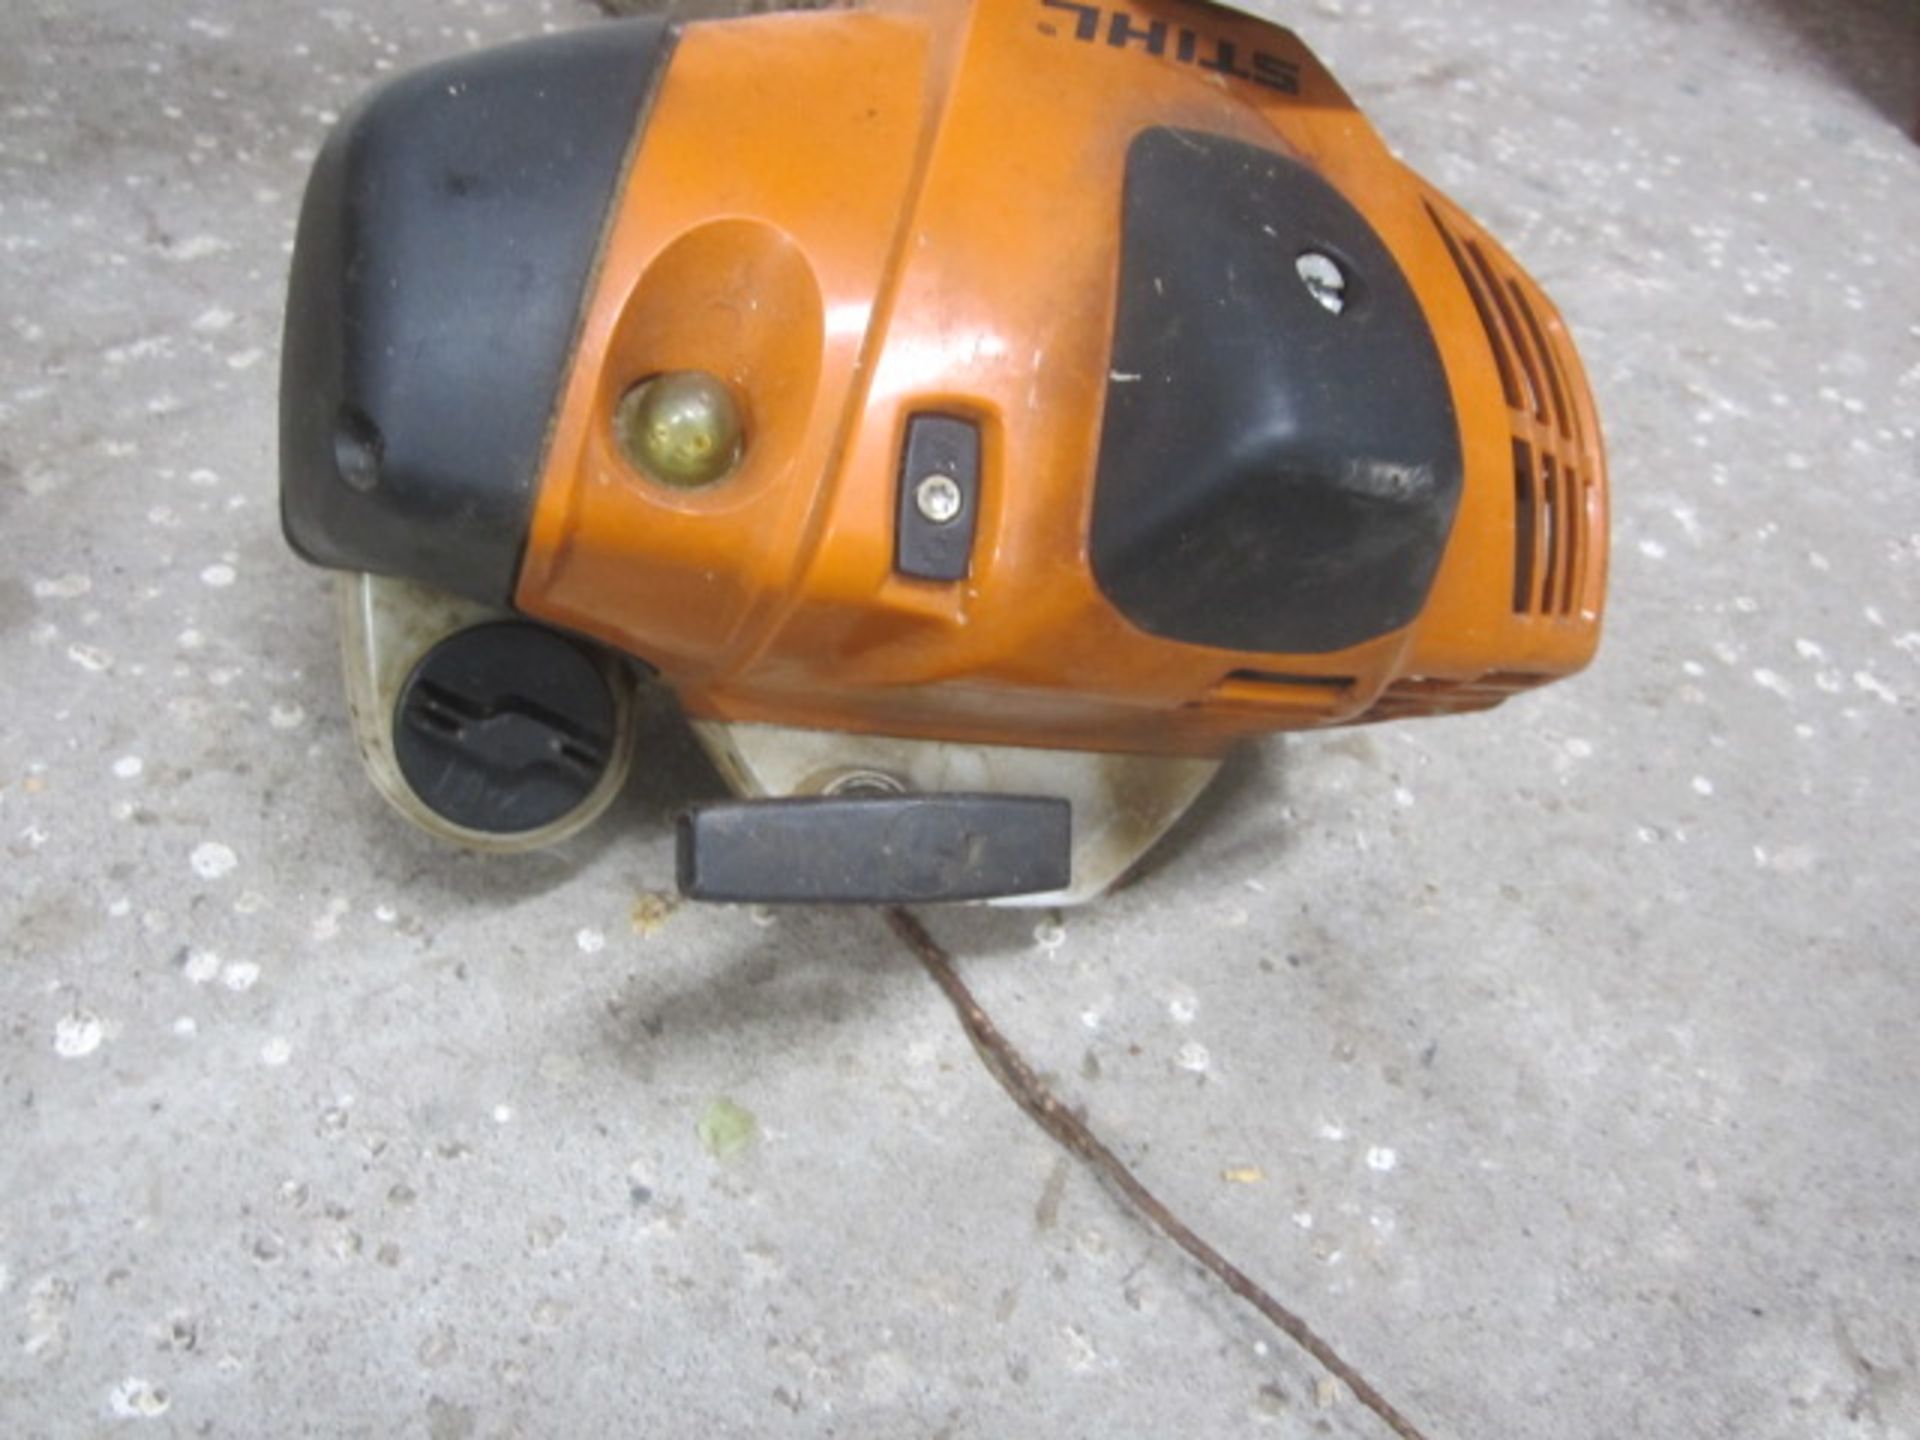 Stihl FS49C petrol strimmer - working condition unknown - Image 2 of 3